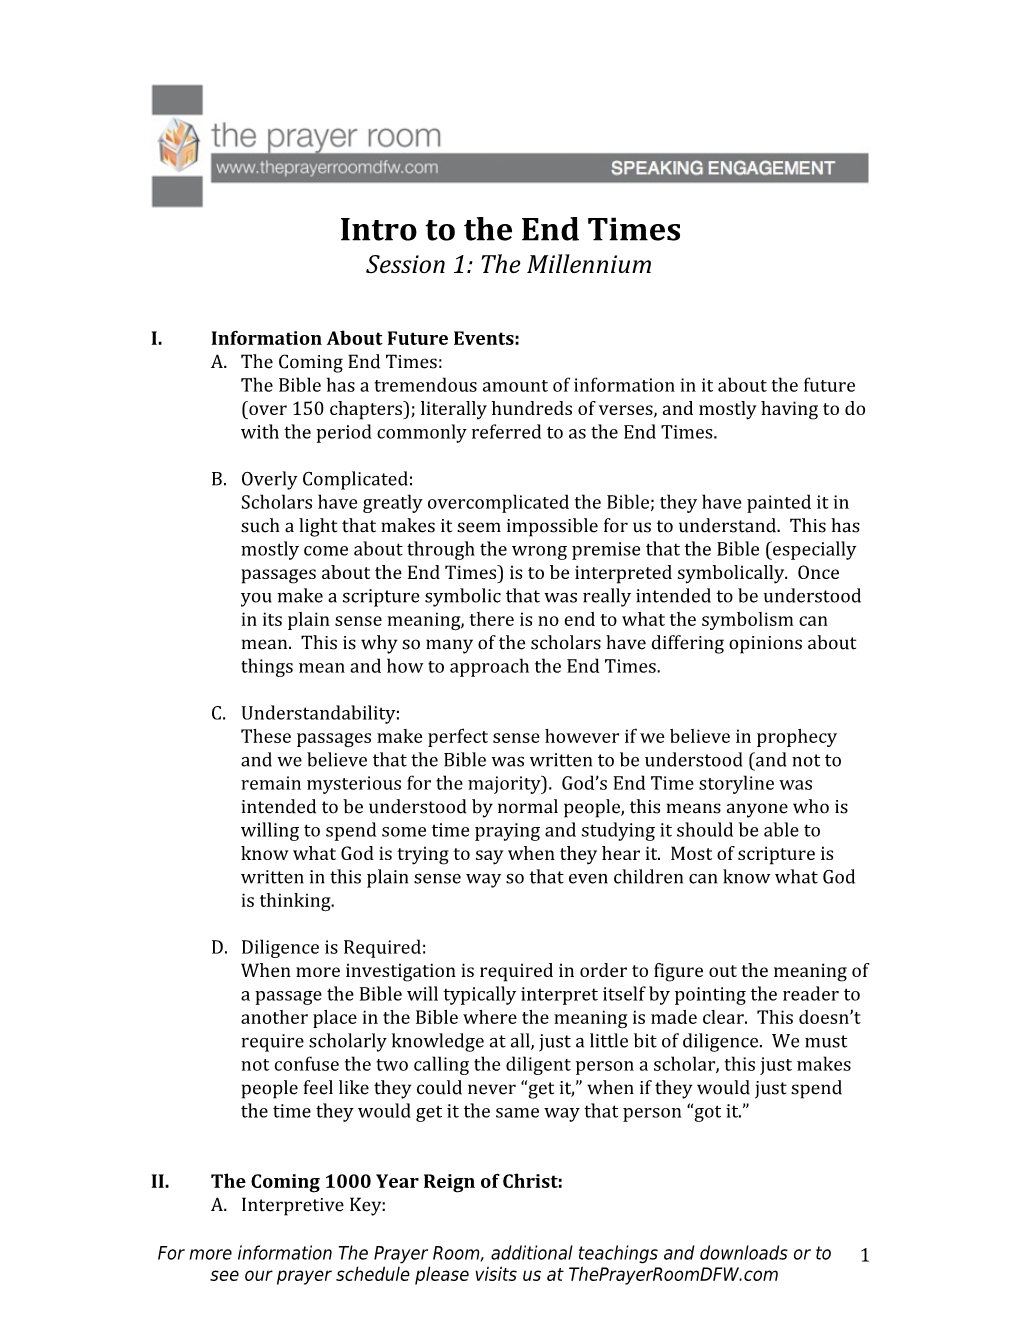 Intro to the End Times